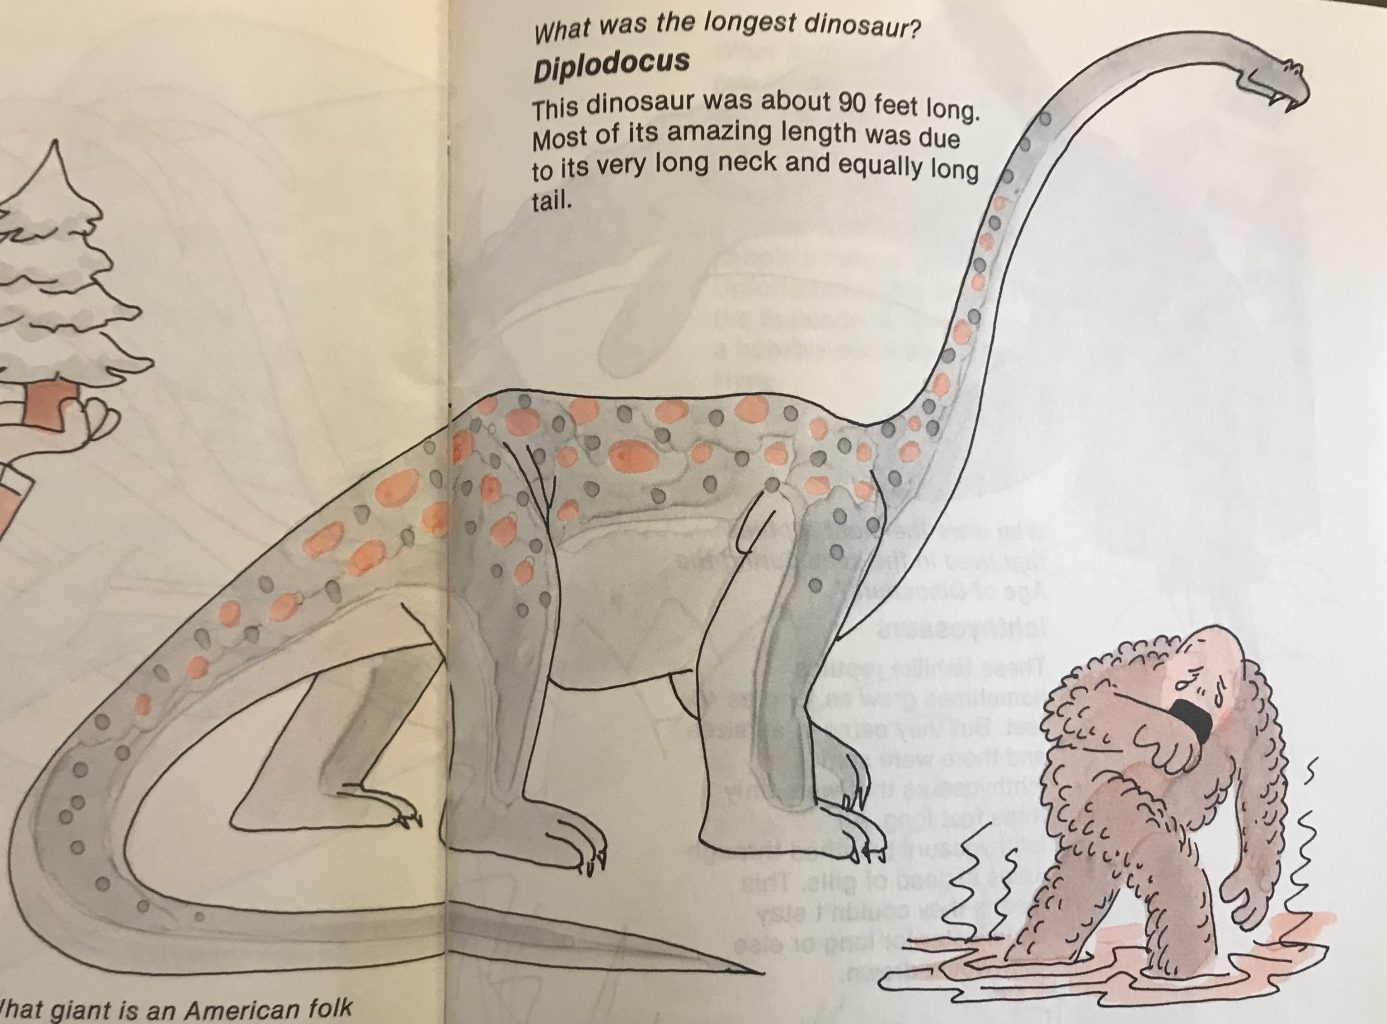 A cartoony Diplodocus with red speckles and snake-like fangs.